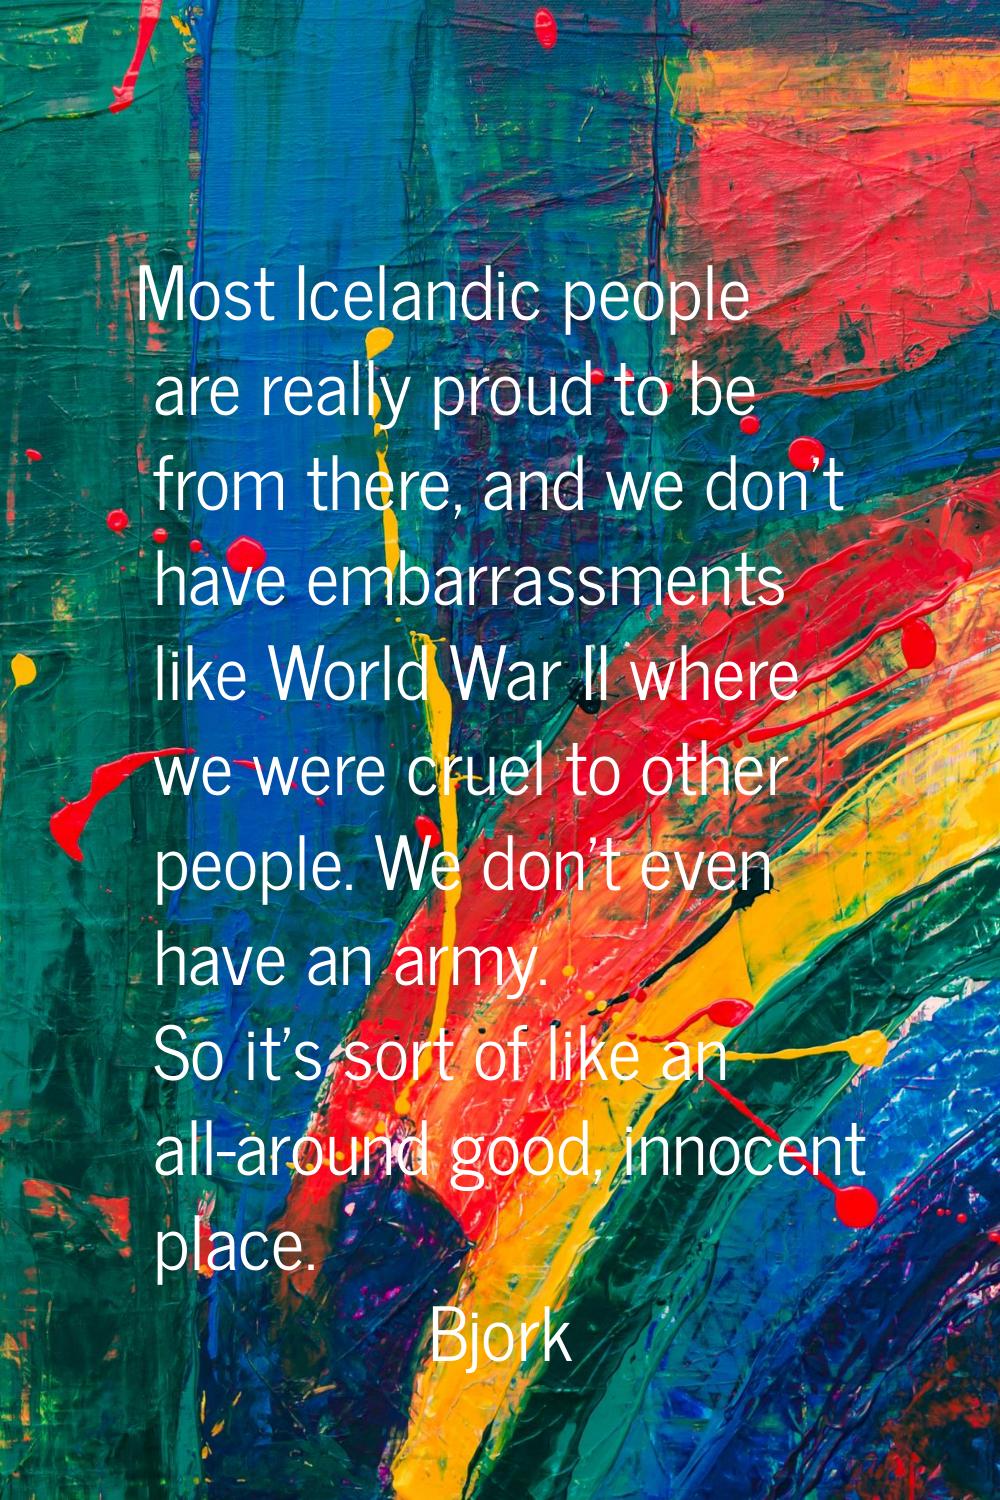 Most Icelandic people are really proud to be from there, and we don't have embarrassments like Worl